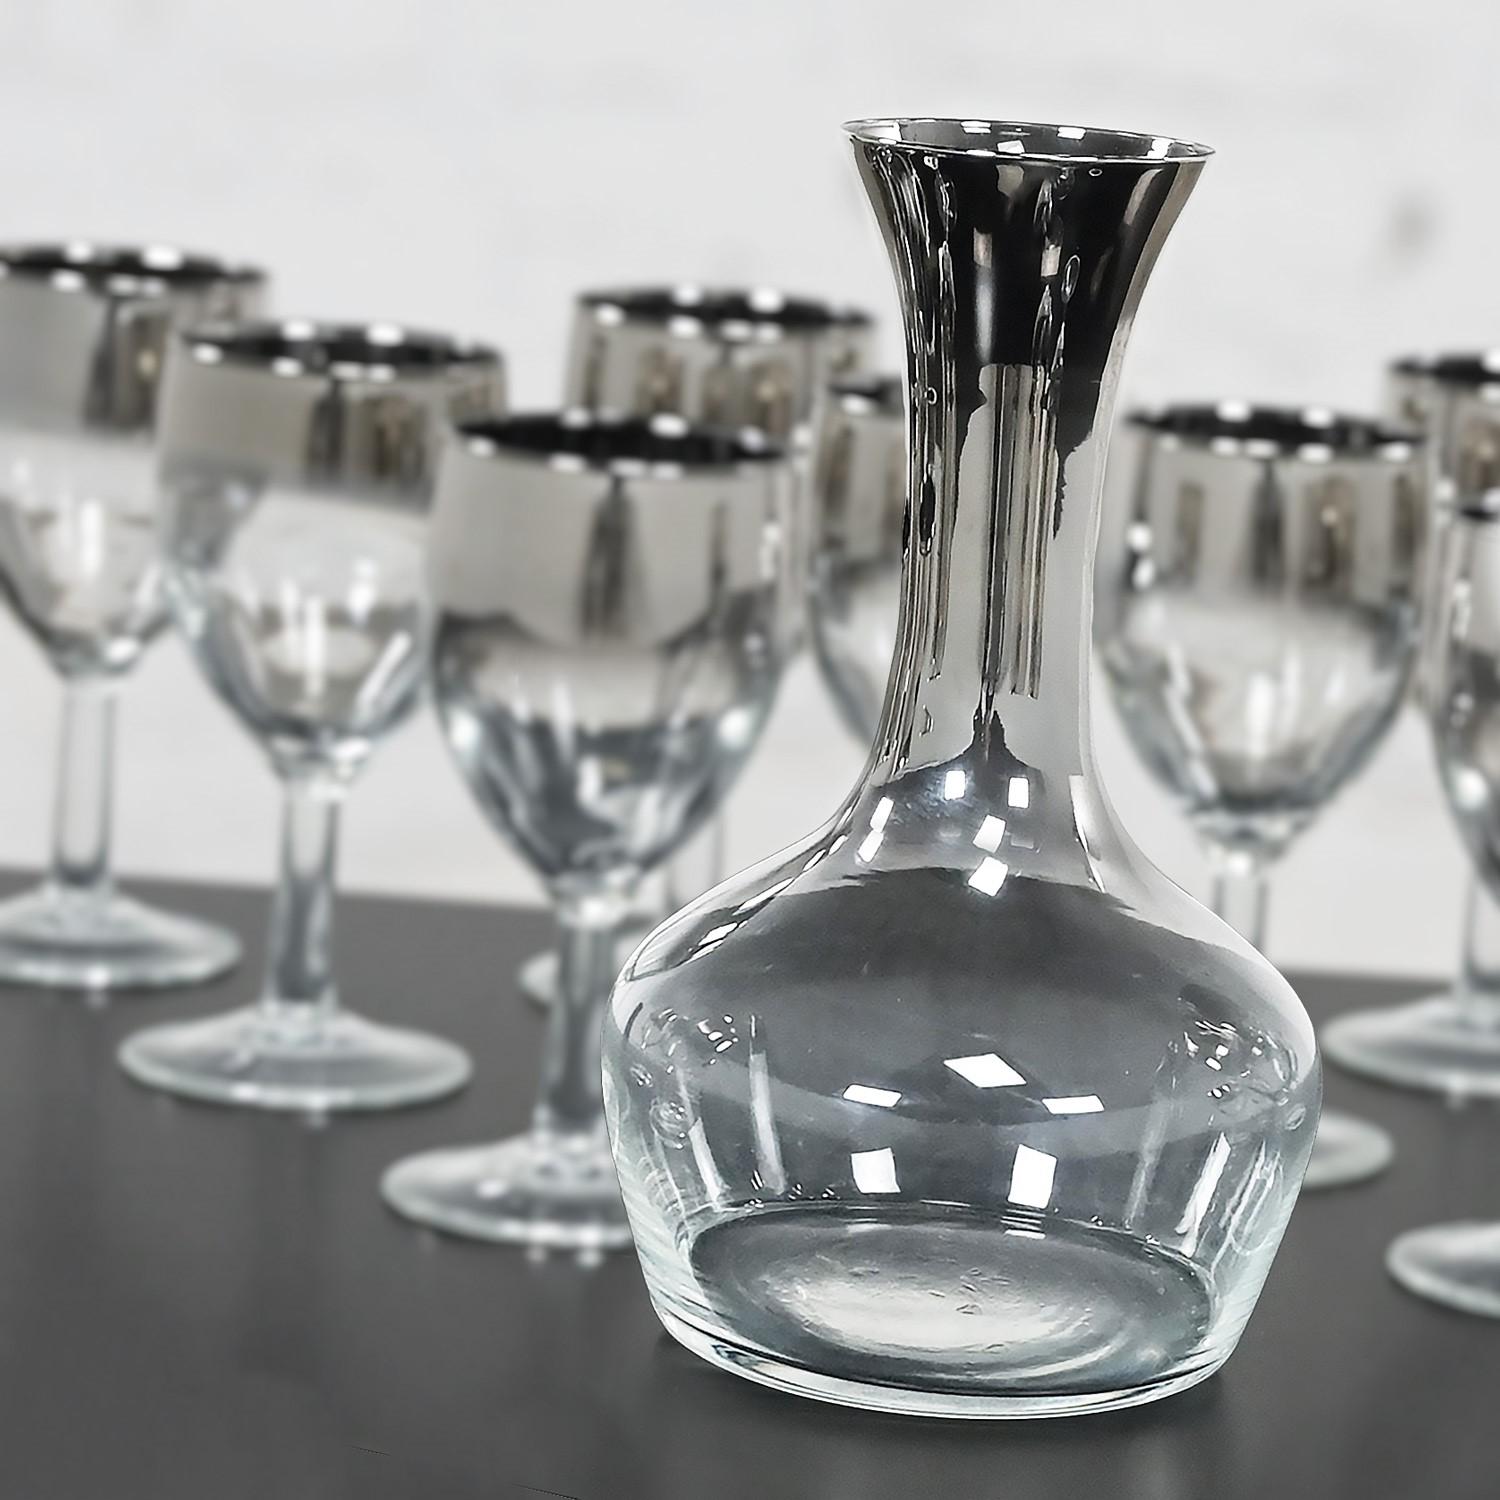 Stunning vintage mid-century modern beverage serving set of eight silver fade ombre French stem glasses and one carafe or decanter in the style of Dorothy Thorpe but unsigned. Beautiful condition, keeping in mind that this is vintage and not new so